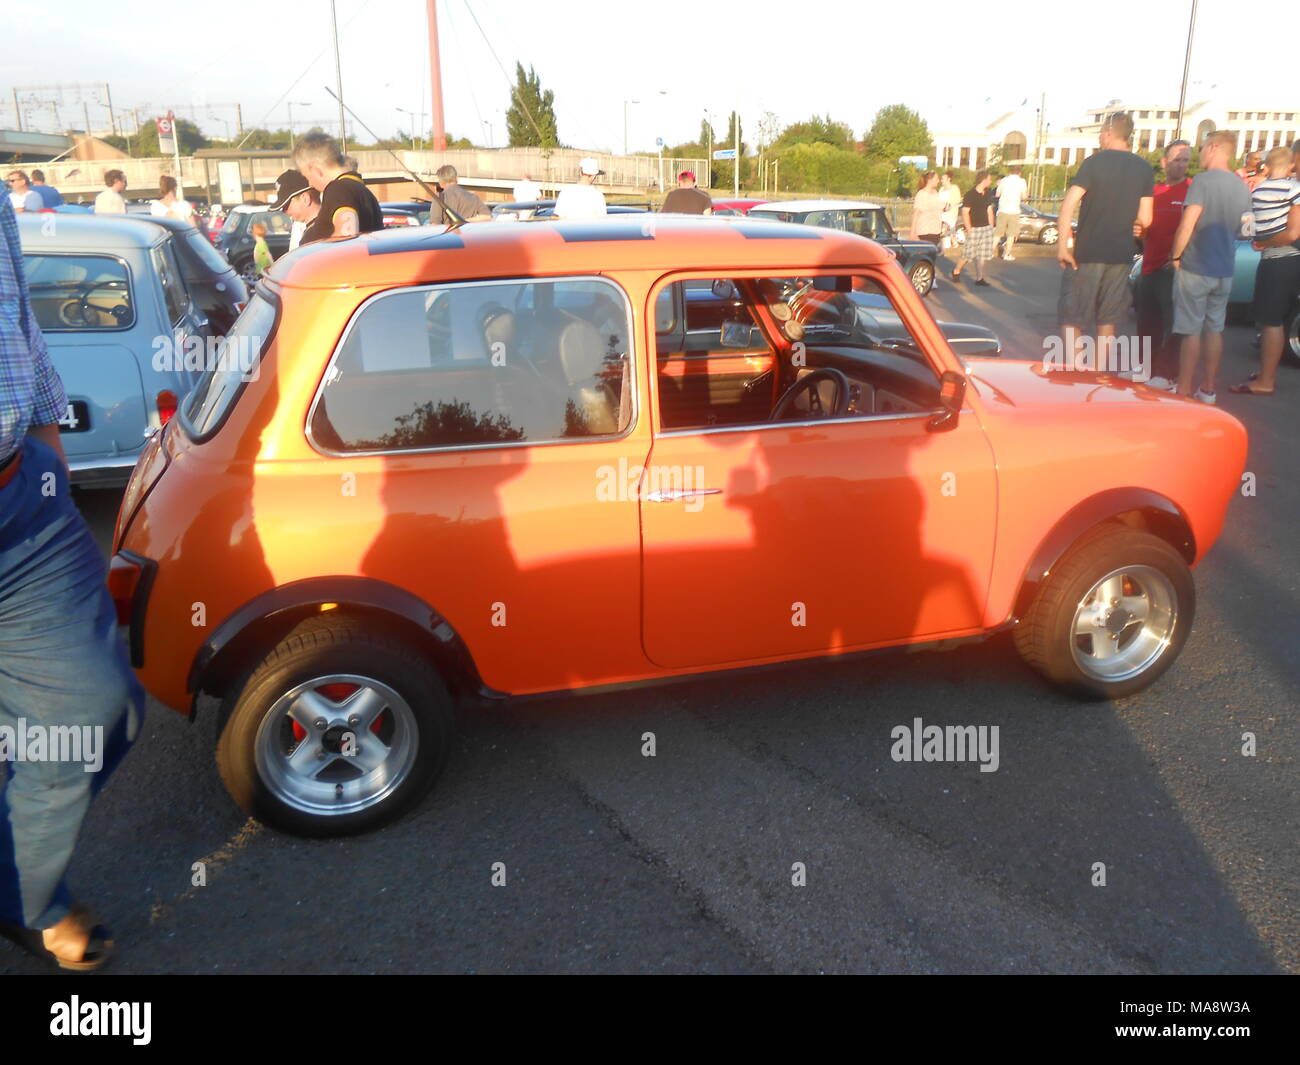 Mini Car 1960s High Resolution Stock Photography and Images - Alamy